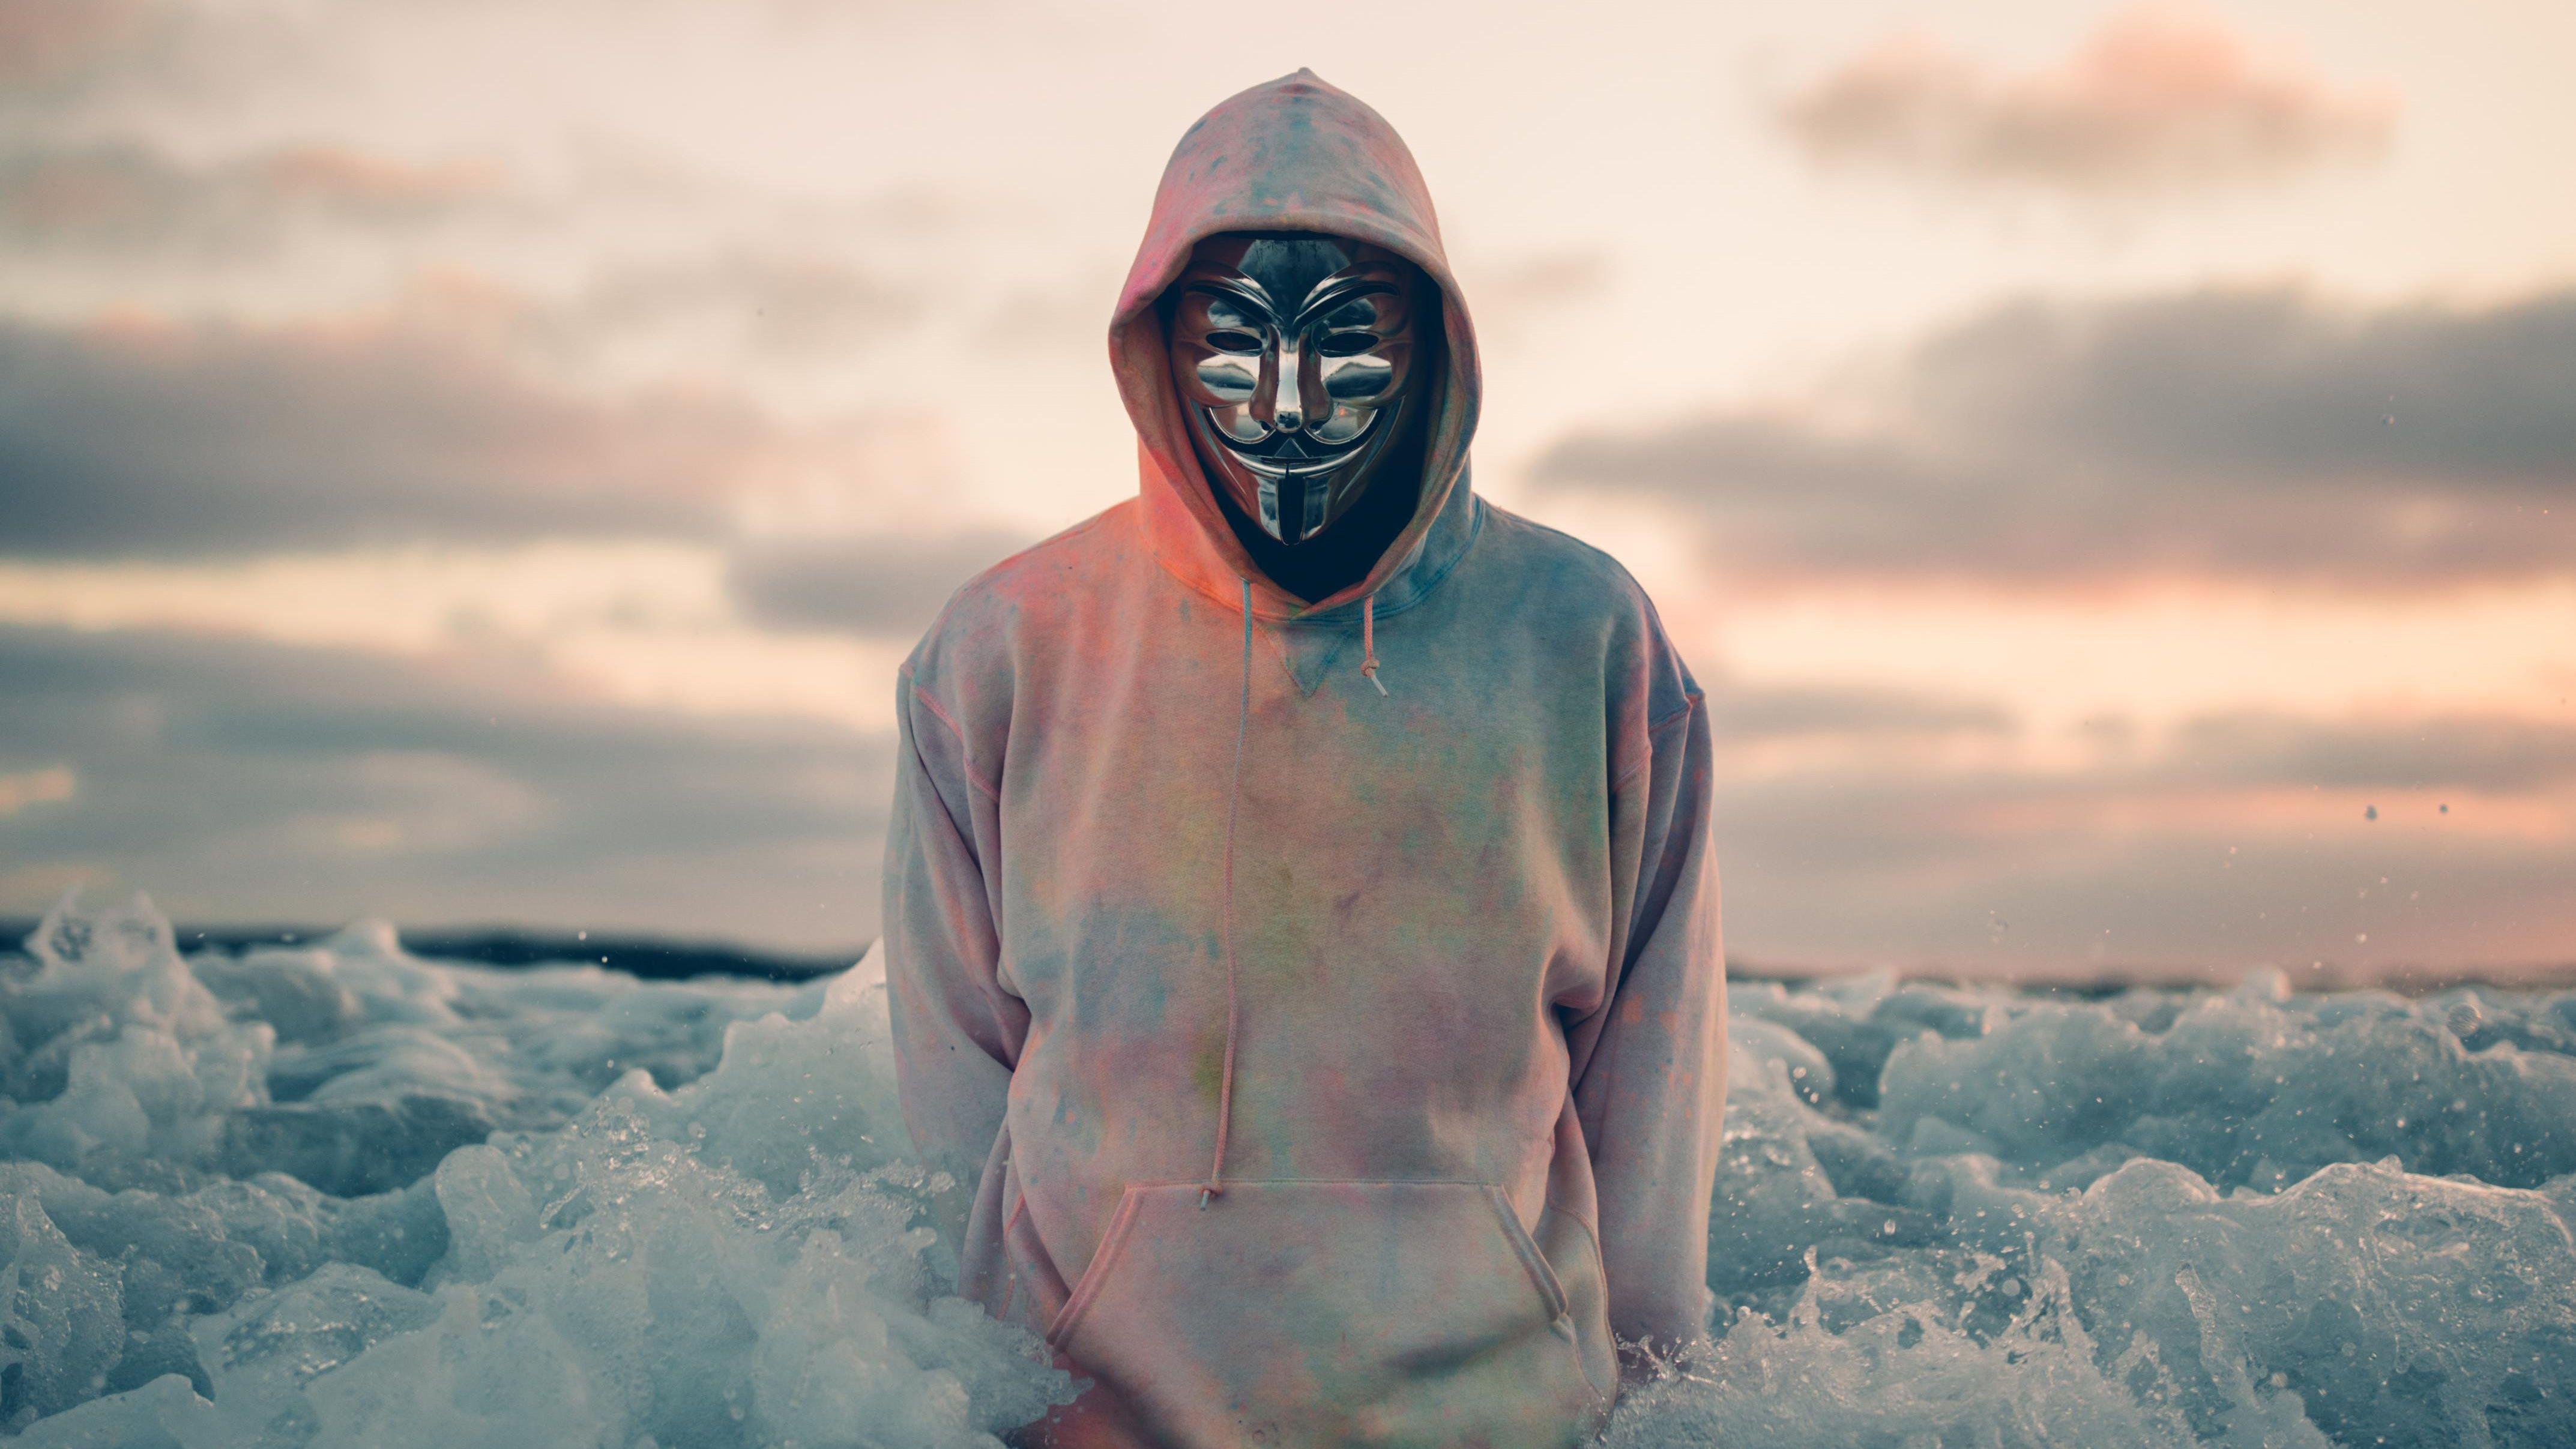 Image Anonymous Full Hd | All Wallapers